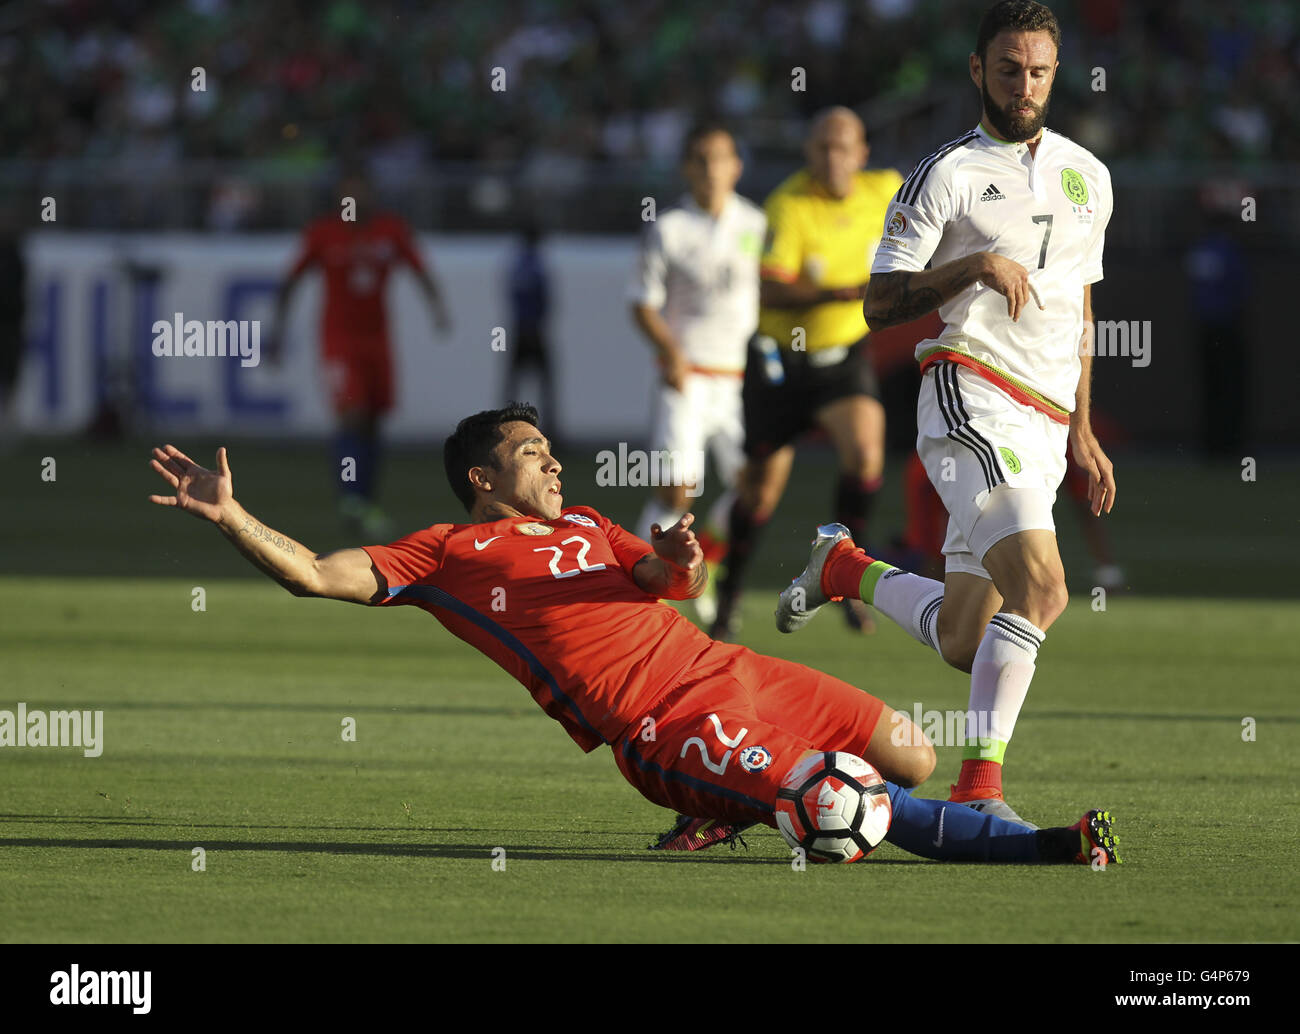 Los Angeles, California, USA. 18th June, 2016. Chile forward Edson Puch #22 slides to the ball against Mexico defender Miguel Layun #7 in the Copa America soccer match between Mexico and Chile at the Levi's Stadium in Santa Clara, California, June 18, 2016. Chile won 7-0. Credit:  Ringo Chiu/ZUMA Wire/Alamy Live News Stock Photo